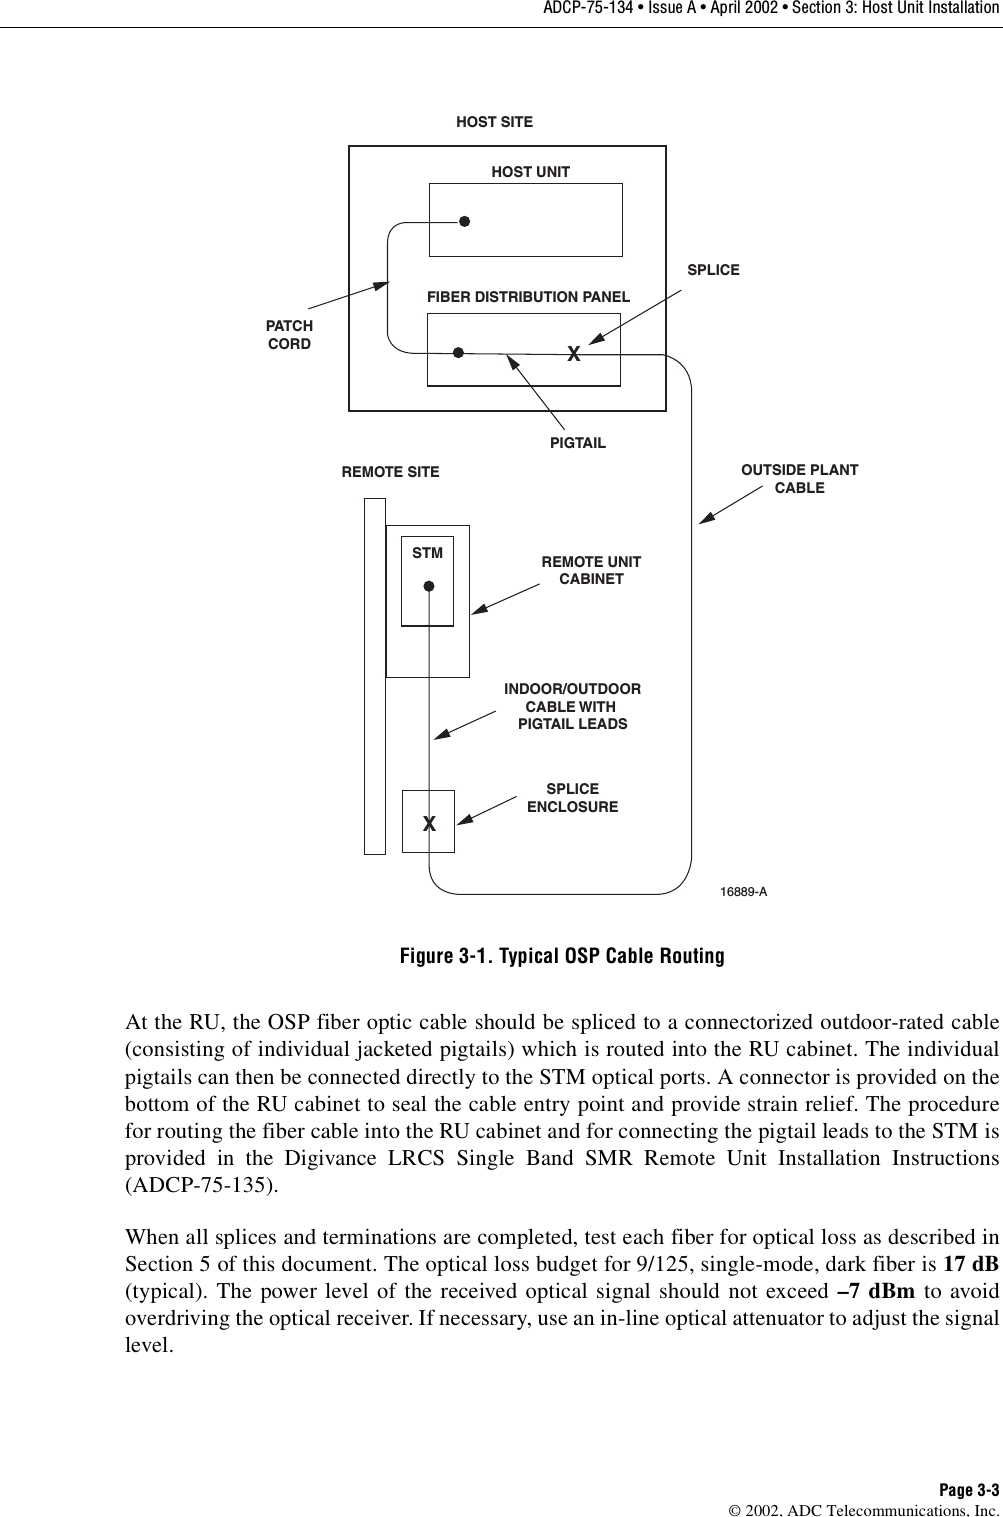 ADCP-75-134 • Issue A • April 2002 • Section 3: Host Unit InstallationPage 3-3©2002, ADC Telecommunications, Inc.Figure 3-1. Typical OSP Cable RoutingAt the RU, the OSP fiber optic cable should be spliced to aconnectorized outdoor-rated cable(consisting of individual jacketed pigtails) which is routed into the RU cabinet. The individualpigtails can then be connected directly to the STM optical ports. Aconnector is provided on thebottom of the RU cabinet to seal the cable entry point and provide strain relief. The procedurefor routing the fiber cable into the RU cabinet and for connecting the pigtail leads to the STM isprovided in the Digivance LRCS Single Band SMR Remote Unit Installation Instructions(ADCP-75-135).When all splices and terminations are completed, test each fiber for optical loss as described inSection 5 of this document. The optical loss budget for 9/125, single-mode, dark fiber is 17 dB(typical). The power level of the received optical signal should not exceed –7 dBm to avoidoverdriving the optical receiver. If necessary, use an in-line optical attenuator to adjust the signallevel.HOST UNITFIBER DISTRIBUTION PANELXXSTMREMOTE SITEHOST SITEPATCHCORDSPLICEPIGTAILSPLICEENCLOSUREINDOOR/OUTDOORCABLE WITH PIGTAIL LEADSOUTSIDE PLANTCABLEREMOTE UNITCABINET16889-A